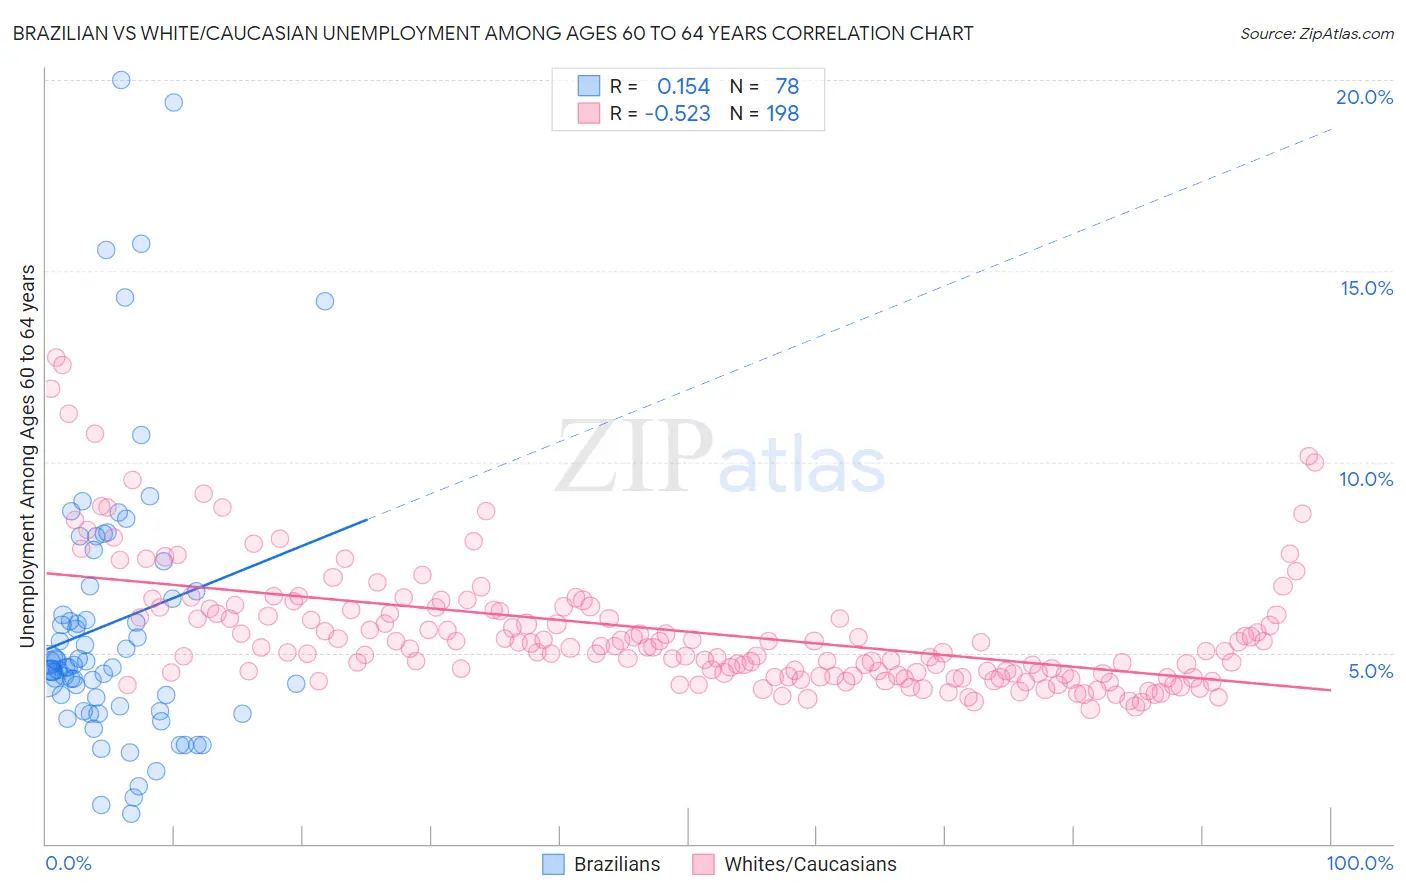 Brazilian vs White/Caucasian Unemployment Among Ages 60 to 64 years